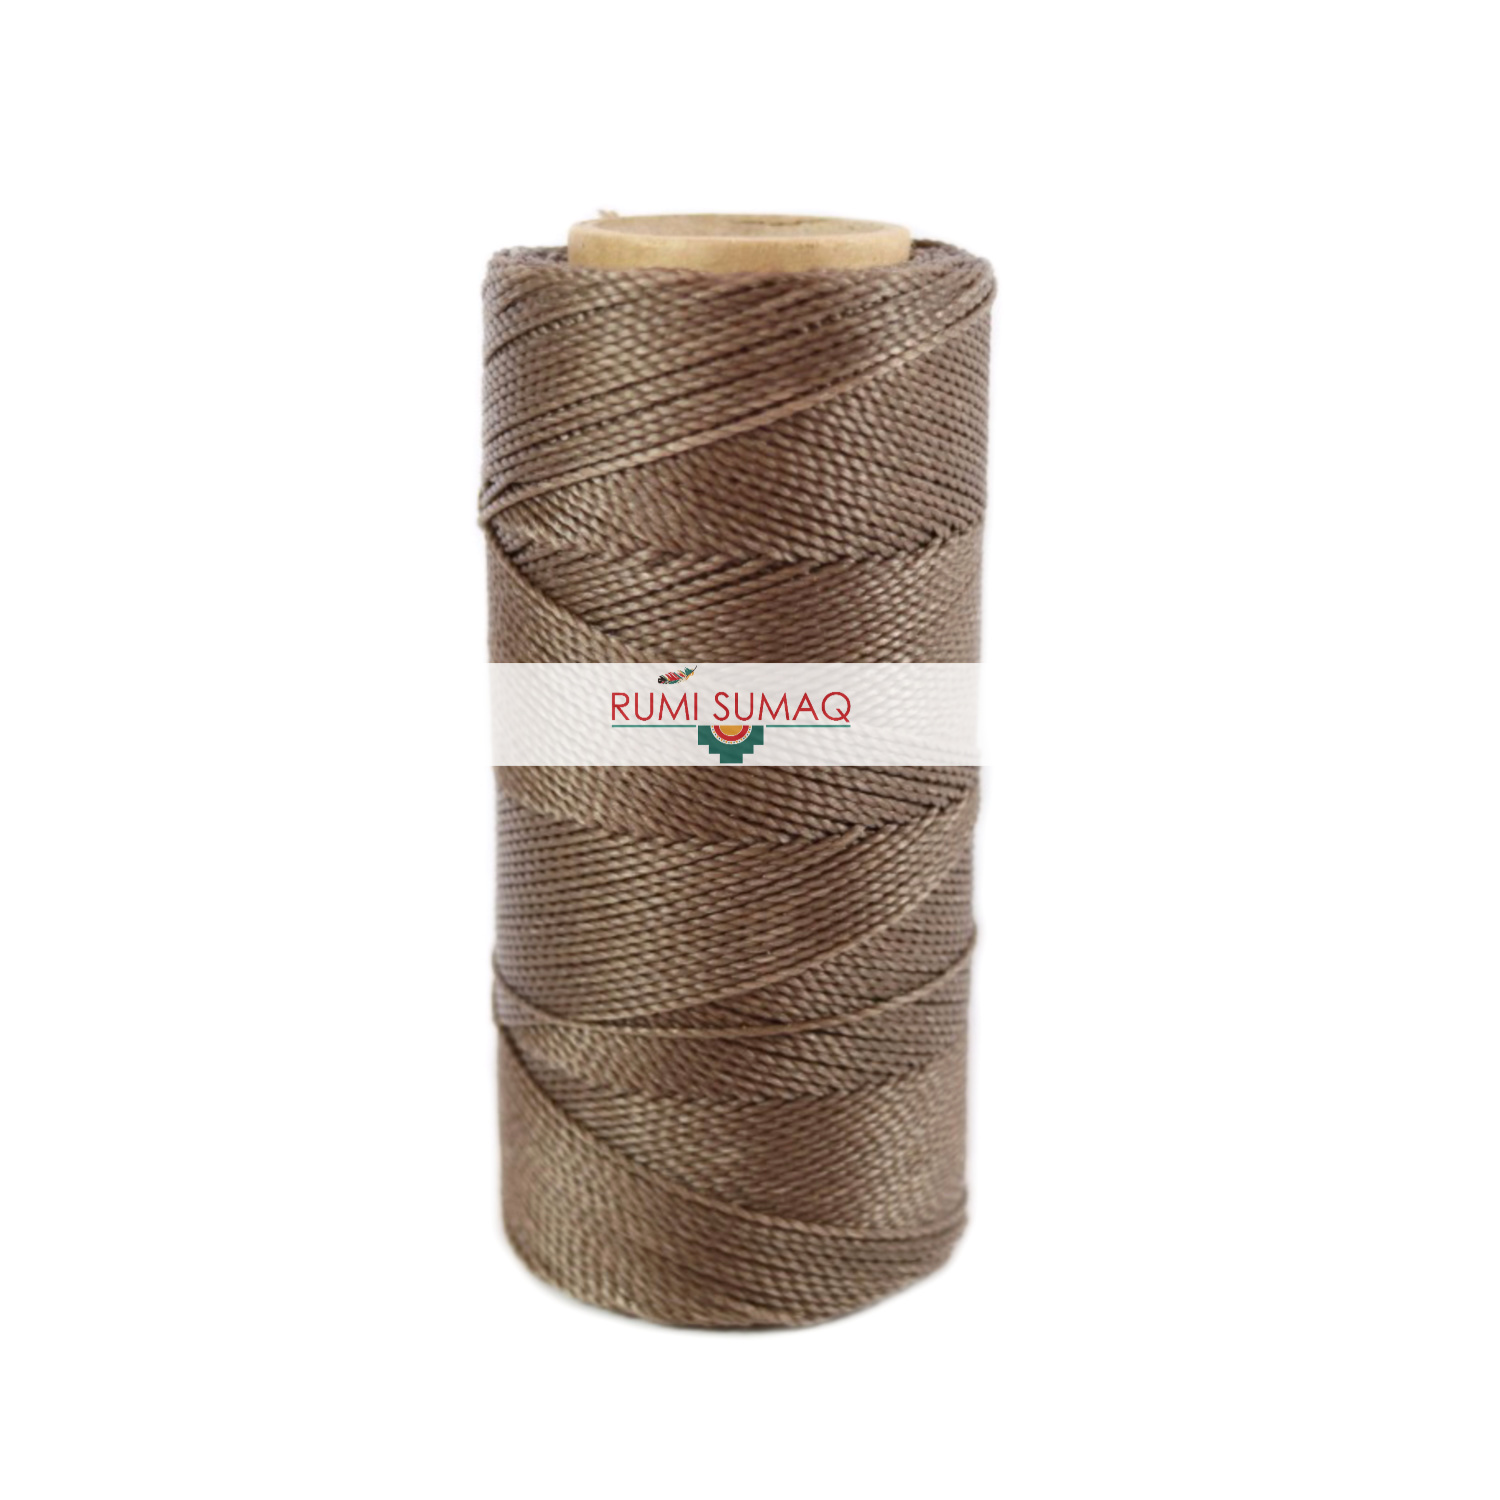 Find Linhasita 293 taupe waxed polyester cord at RUMI SUMAQ, the premier retailer for 1mm Linhasita brand waxed thread for knotting, basket making, beading.